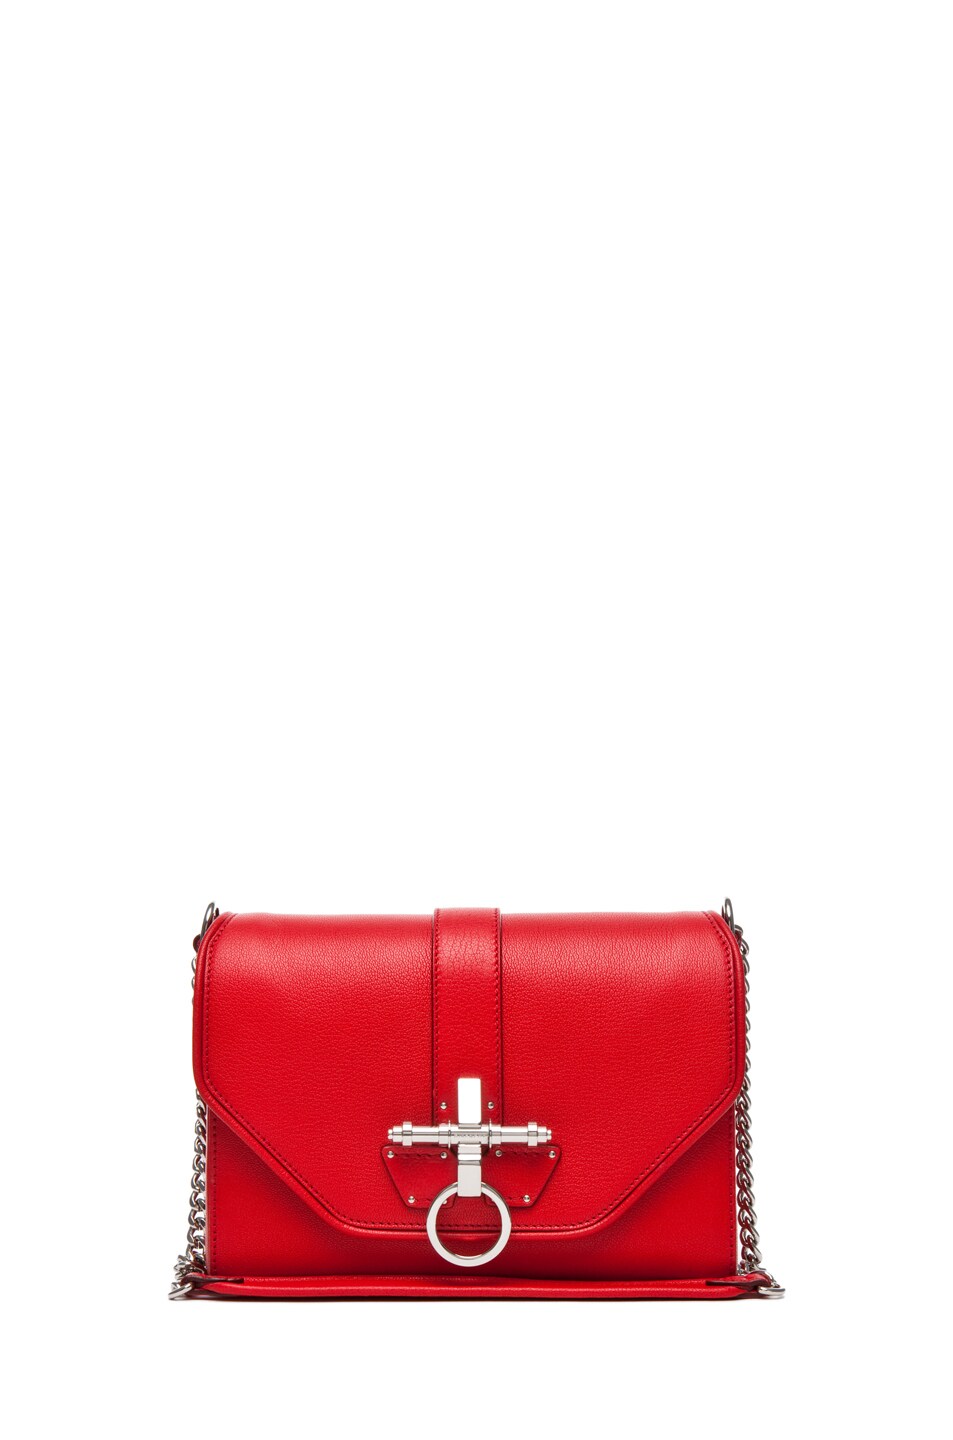 Givenchy Obsedia with Chain in Red | FWRD